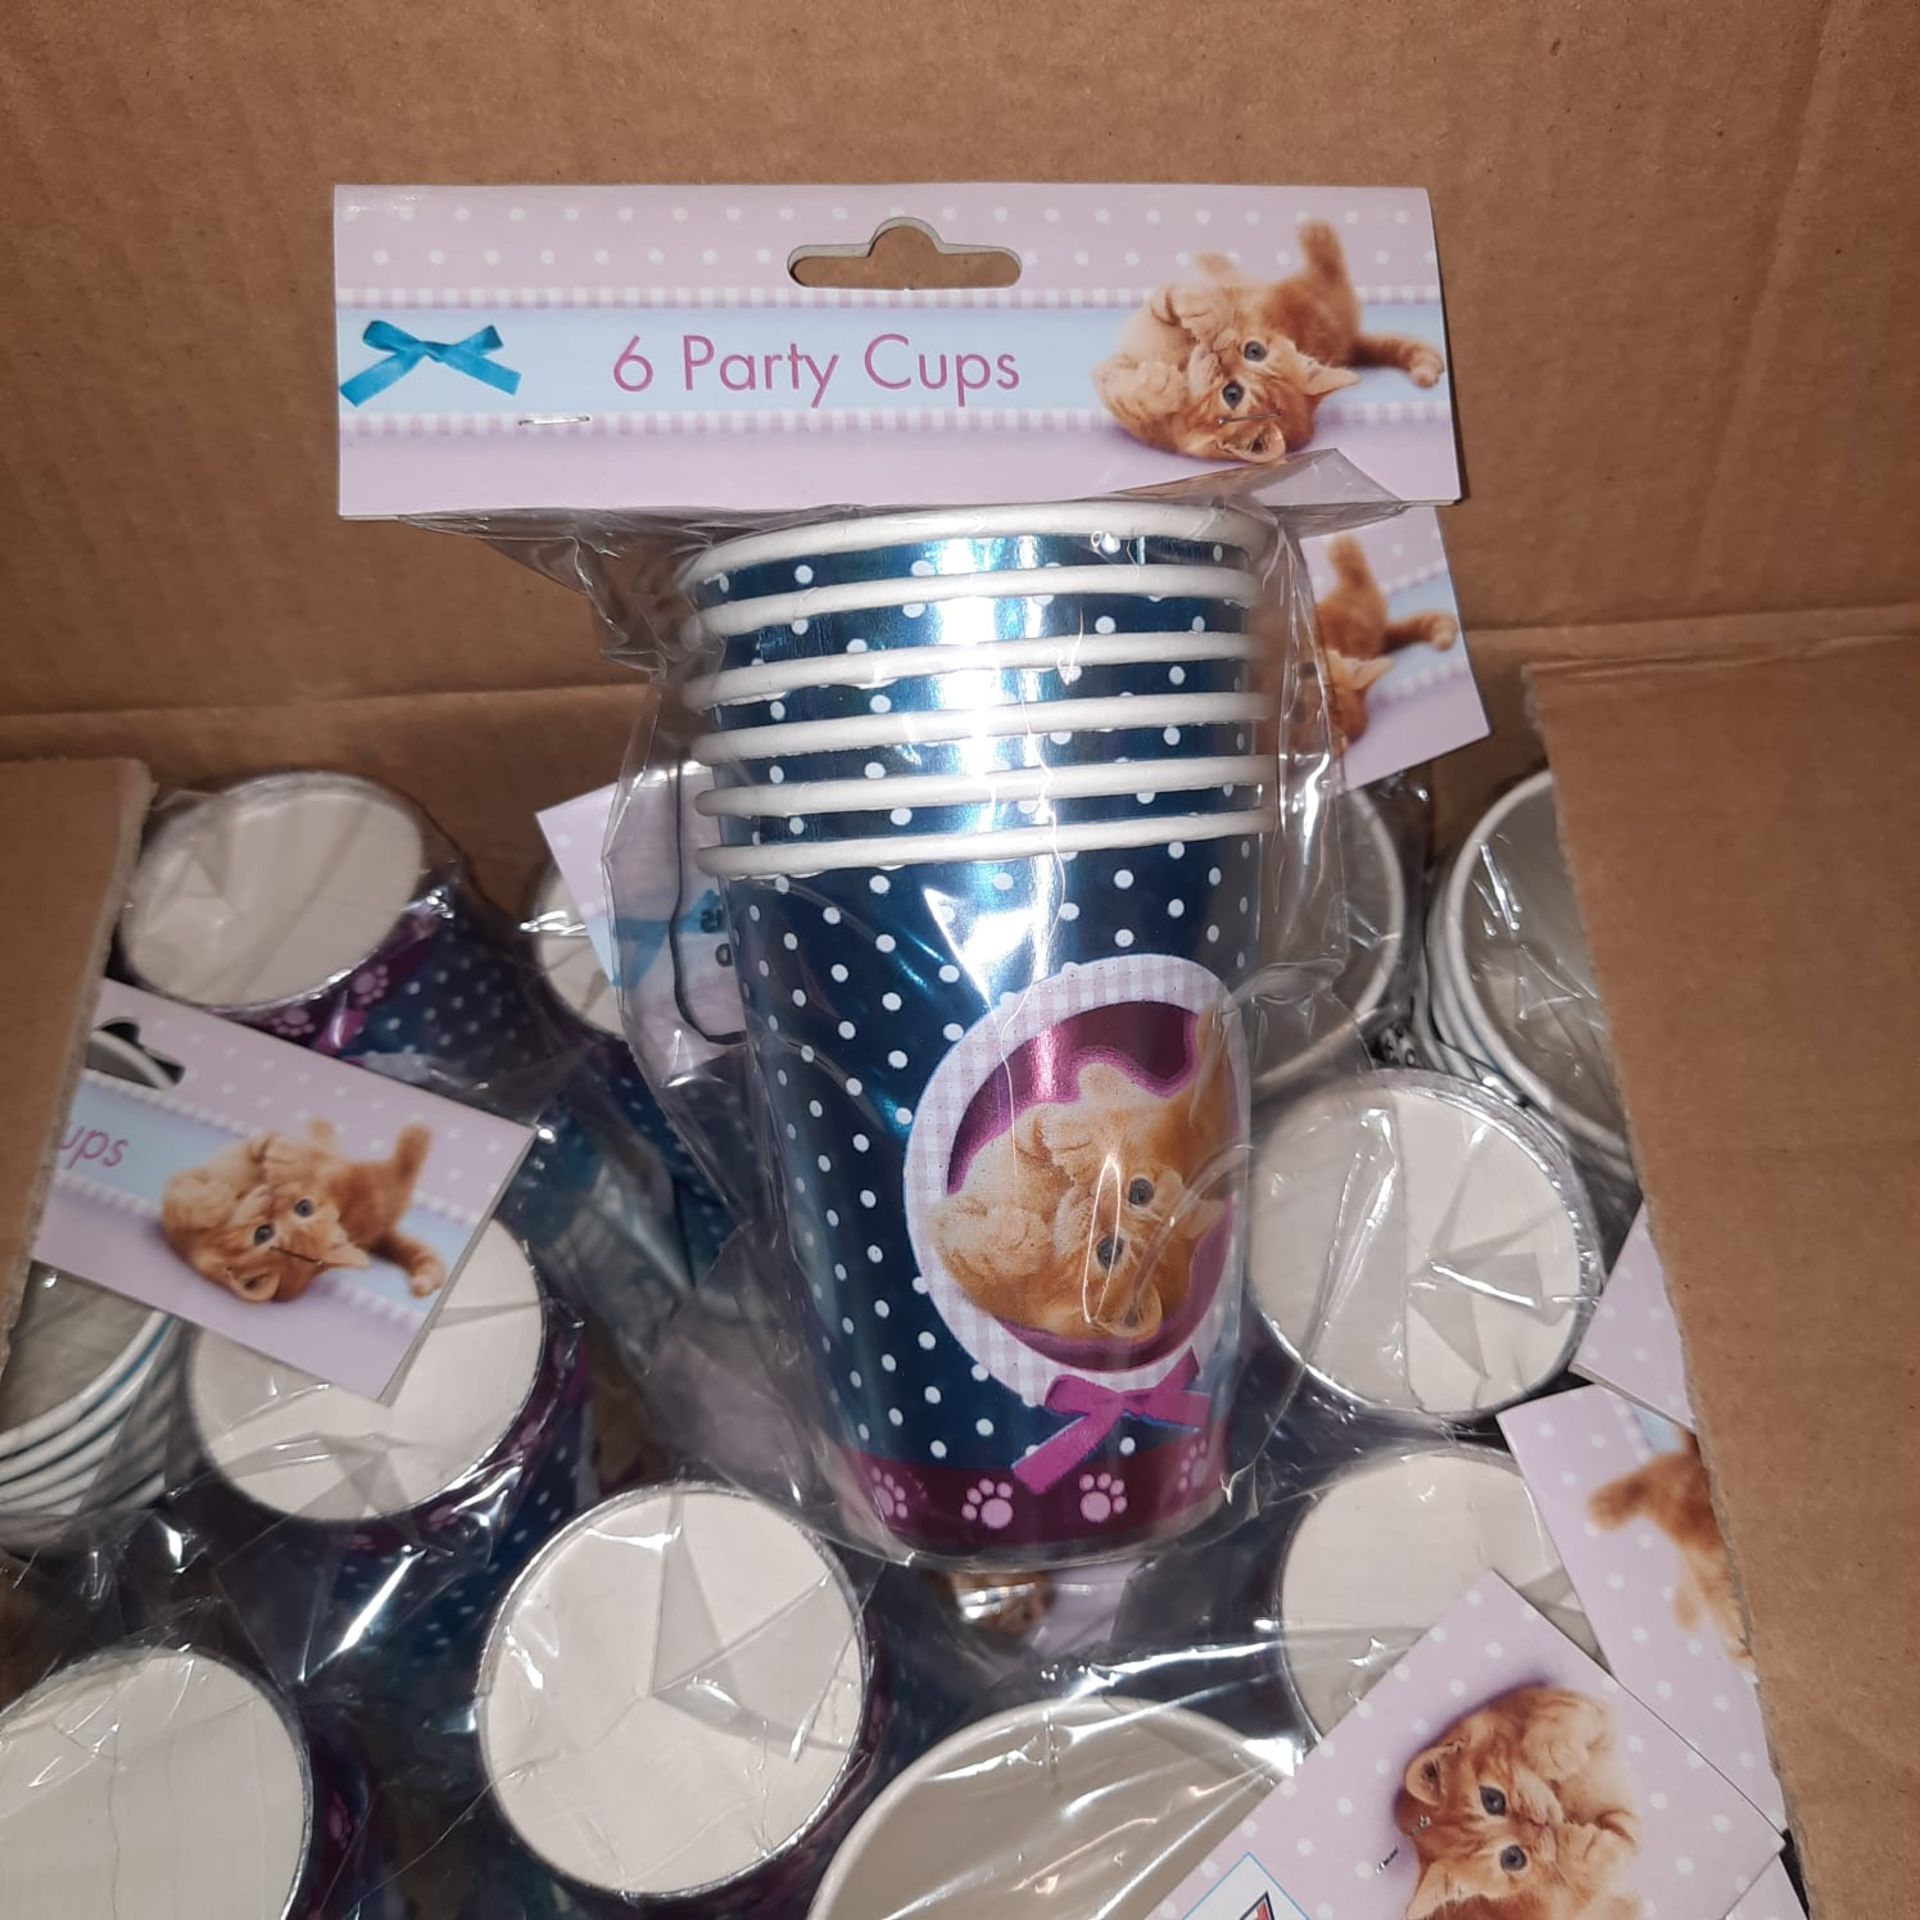 X 72 BRAND NEW & BOXED CAT & DOG PARTY METALLIC PAPER CUPS SALEROOM AT THE BACK.